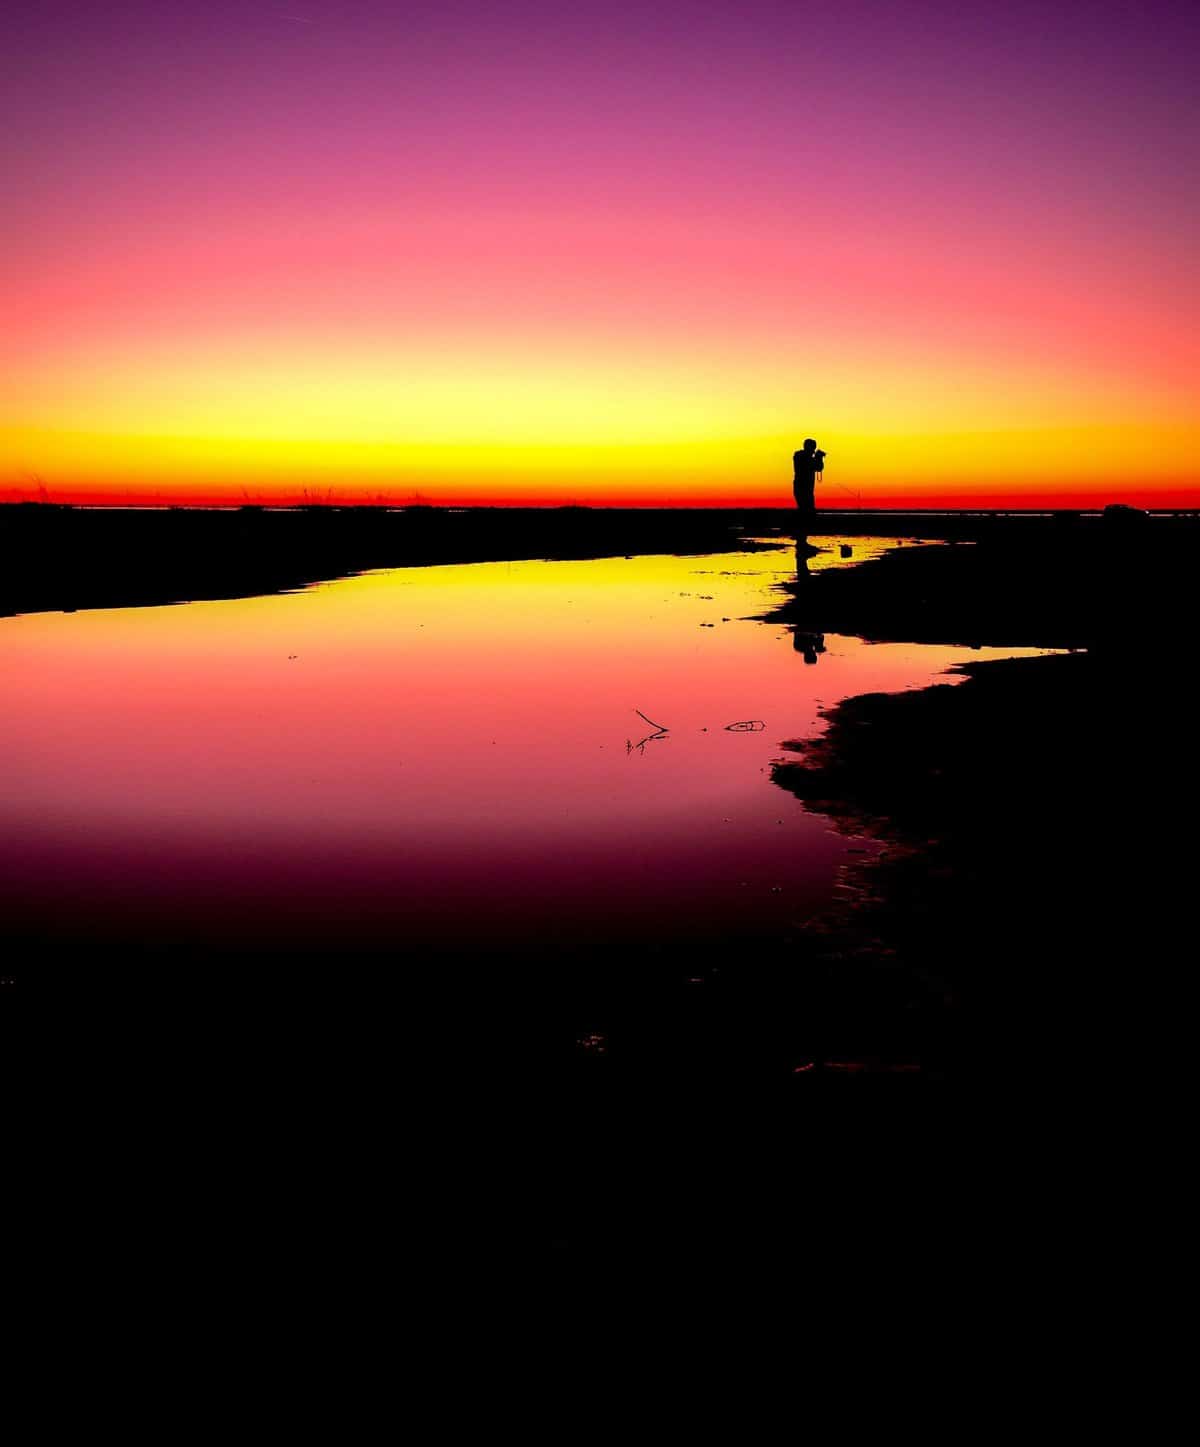 a person stands in silhouette holding a camera against a sunset surrounded by low water as if in a marsh